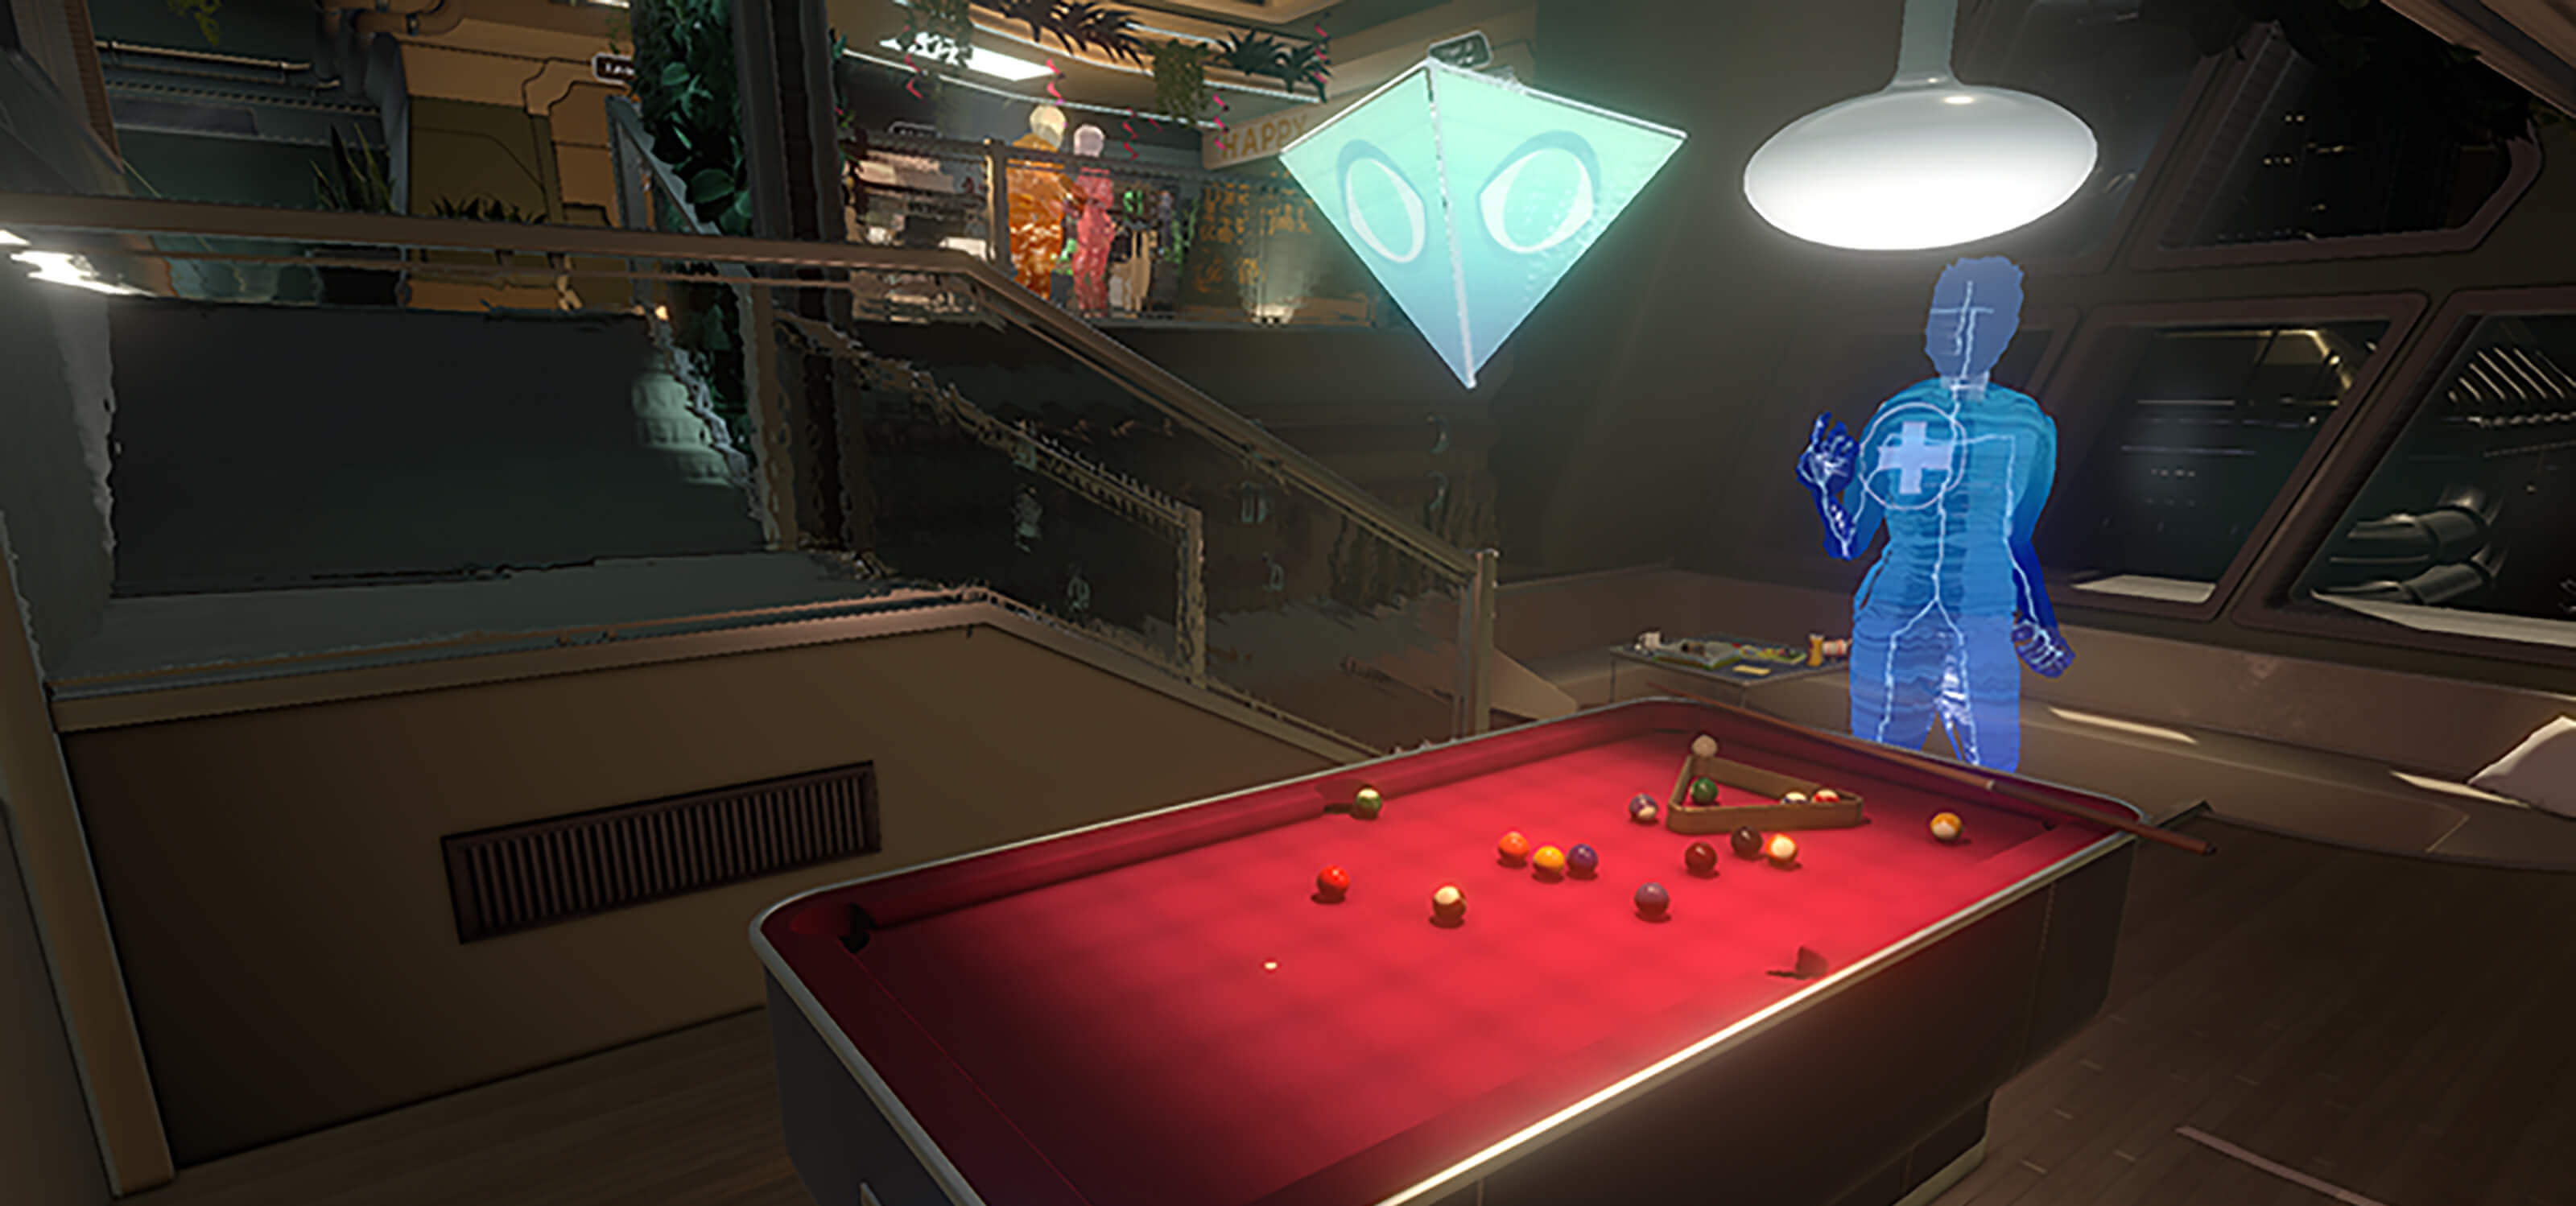 A faceless character plays pool in this screenshot from the Fullbright Company's game Tacoma